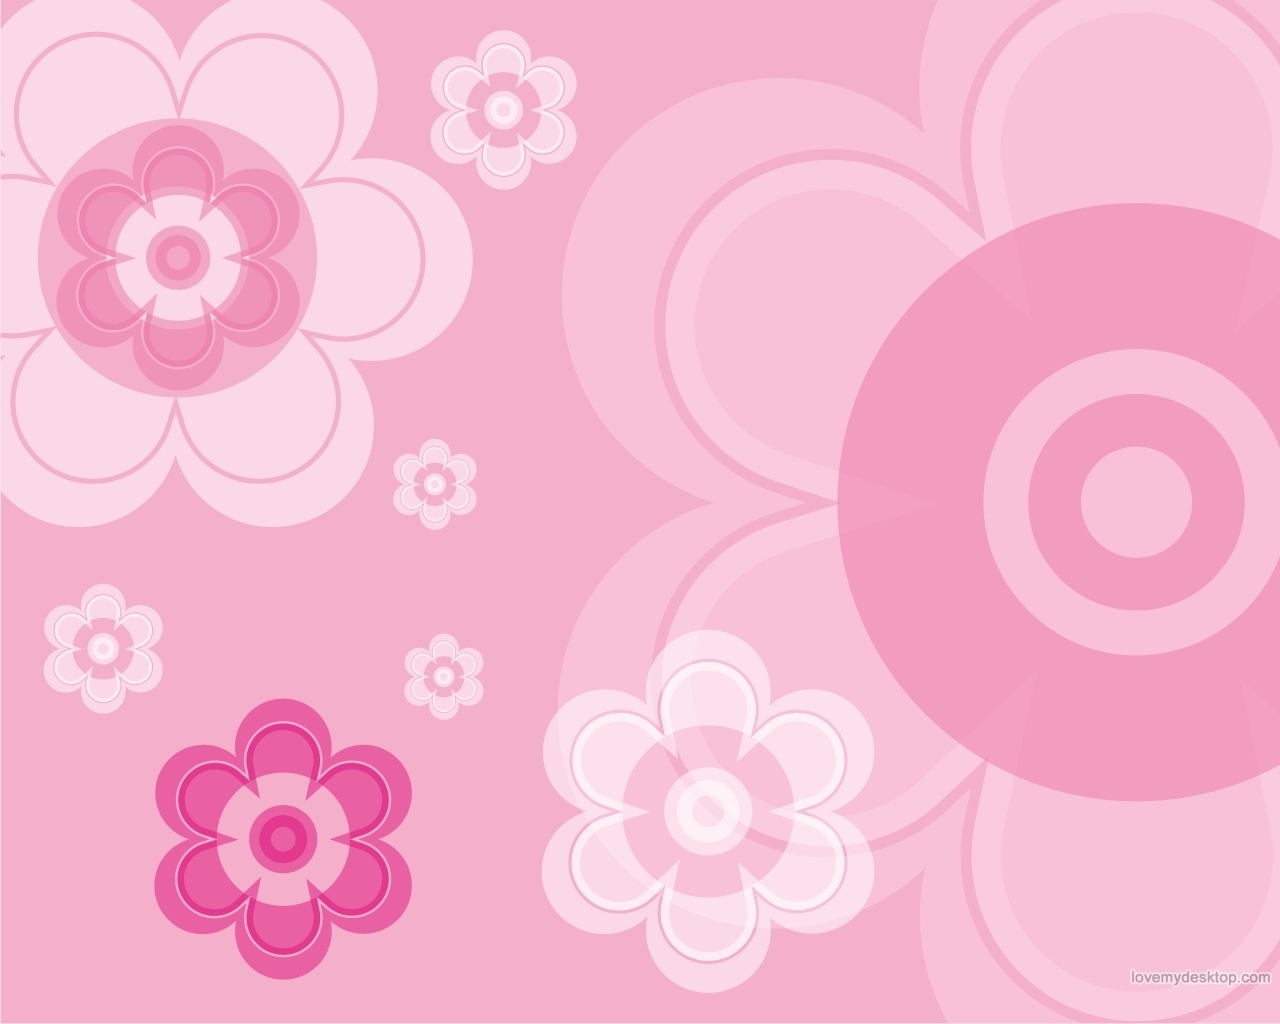 50 Cute Pink Wallpapers For Laptops On Wallpapersafari Here you can find the best pink cute wallpapers uploaded by our community. 50 cute pink wallpapers for laptops